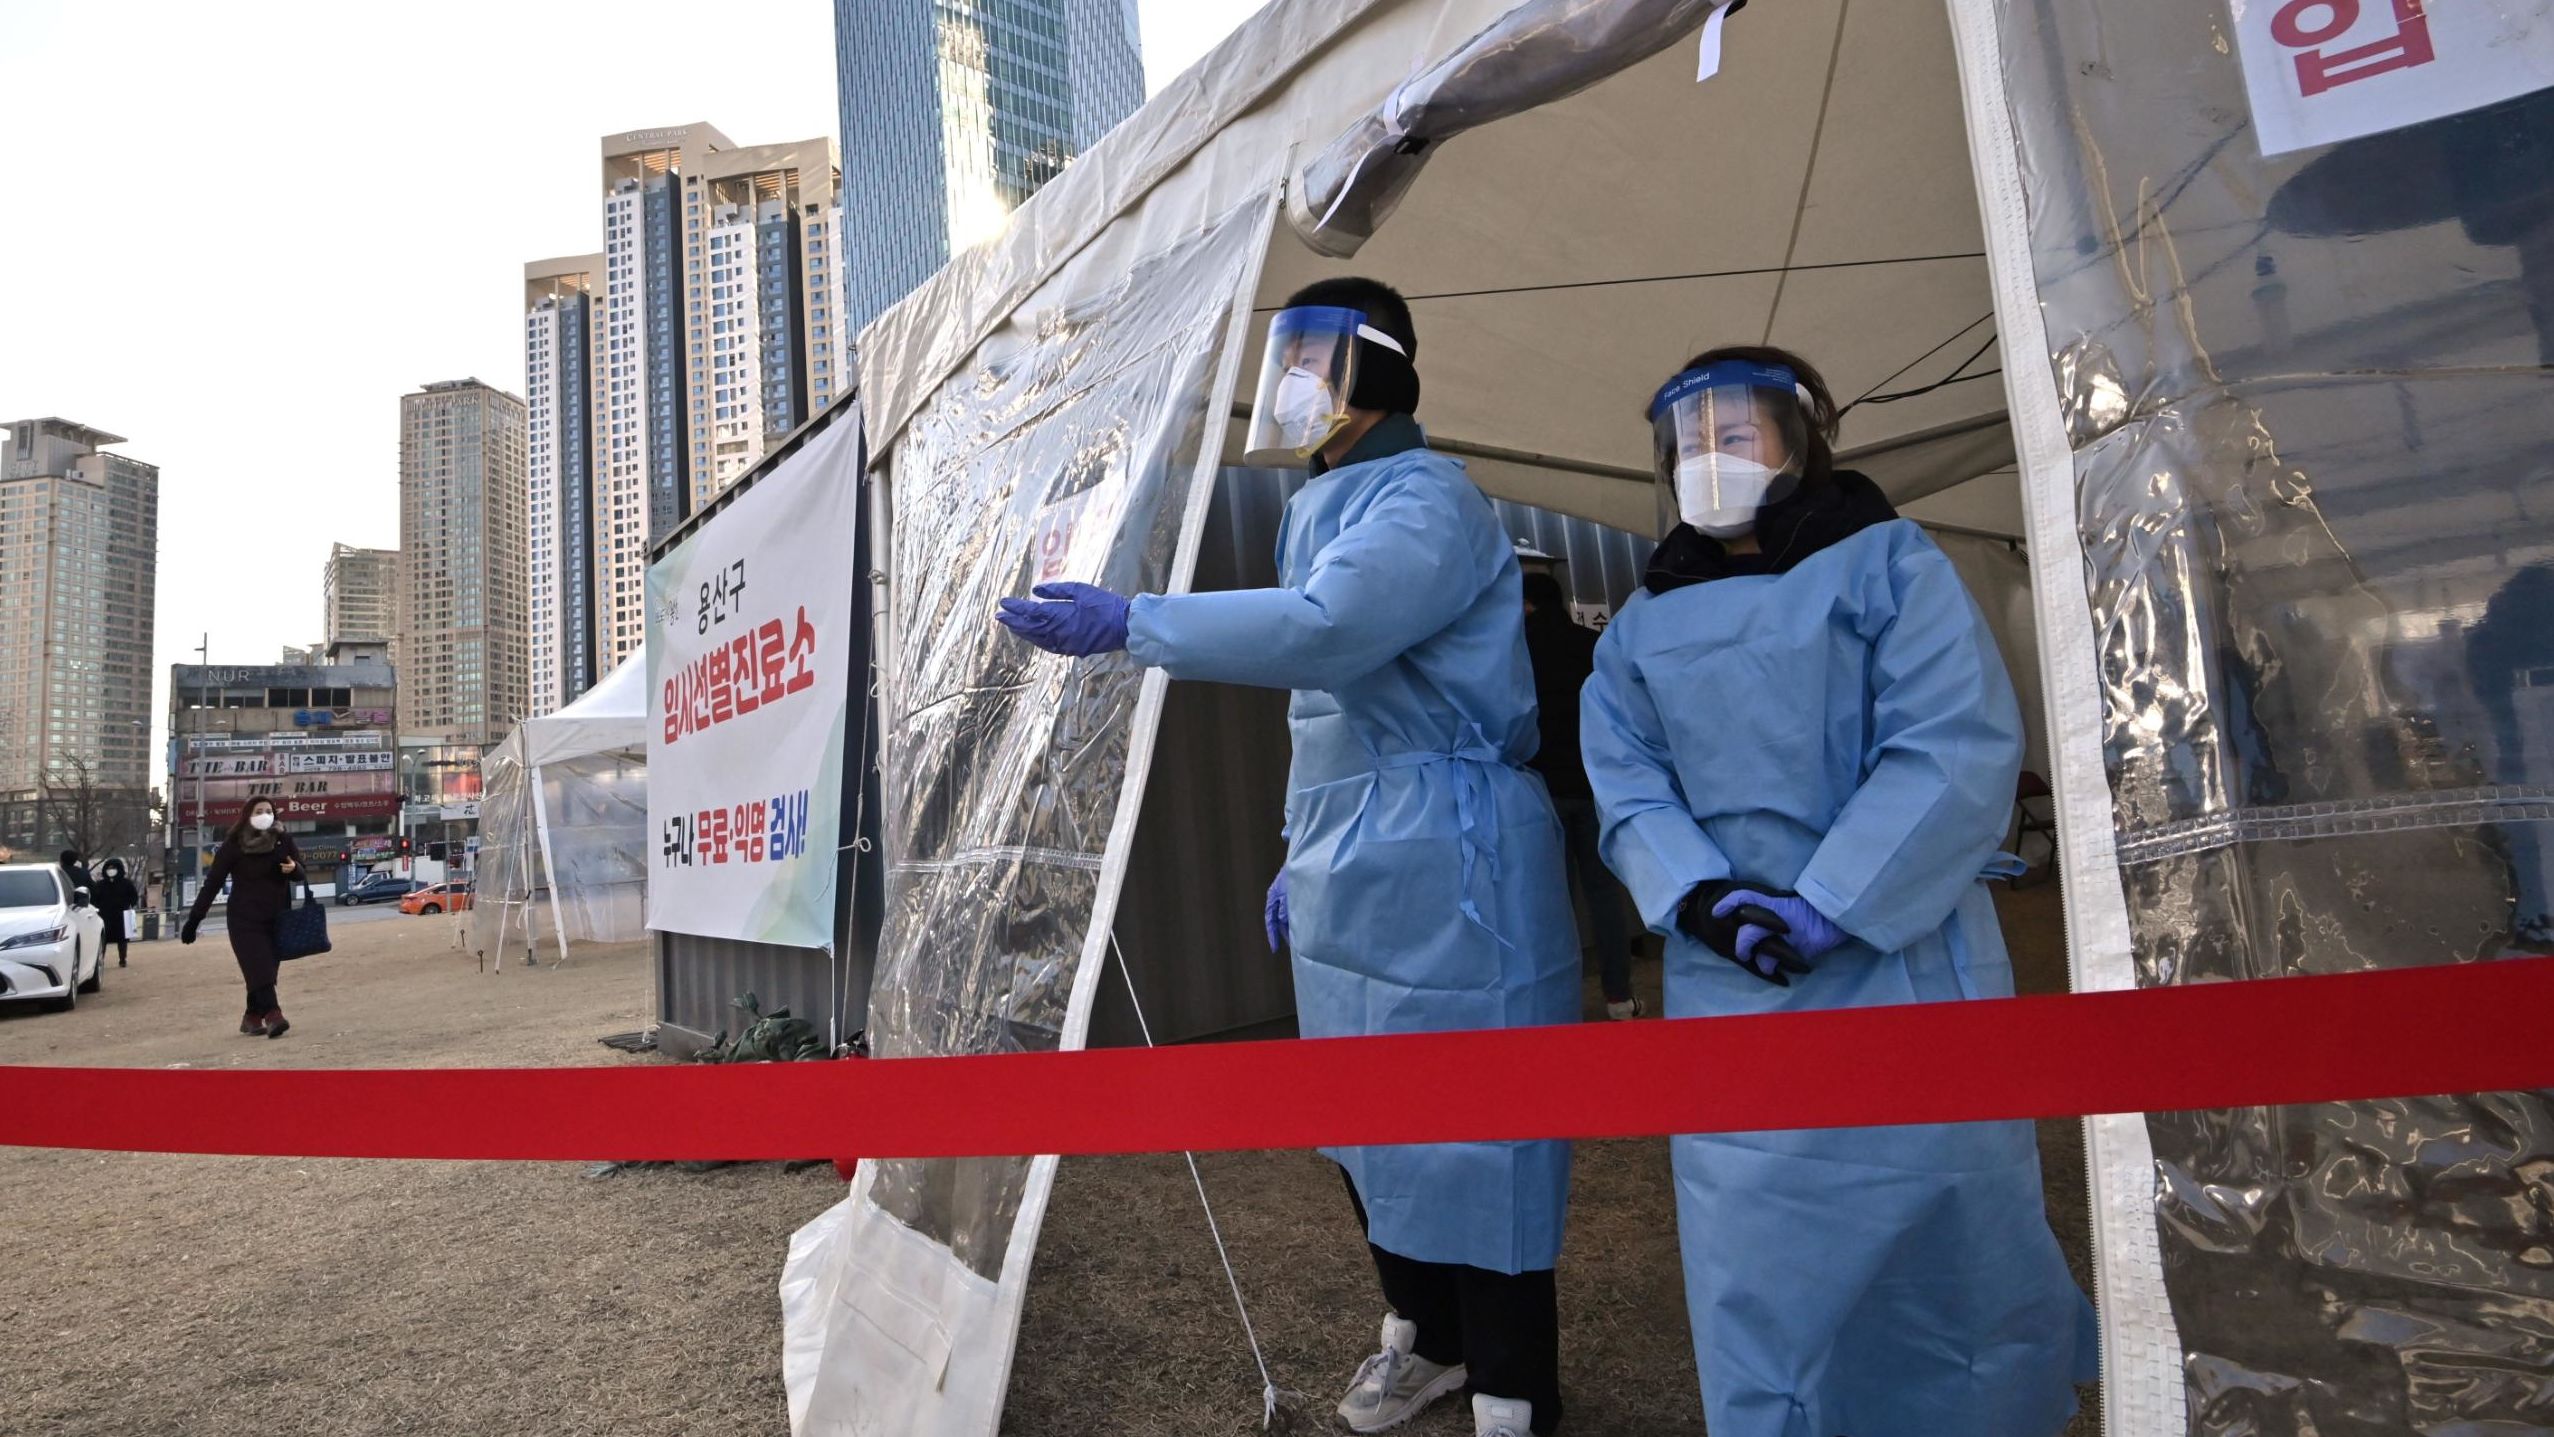 Health officials wearing protective gear guide visitors for the Covid-19 coronavirus test at a temporary testing station outside a railway station in Seoul on December 16, 2020.